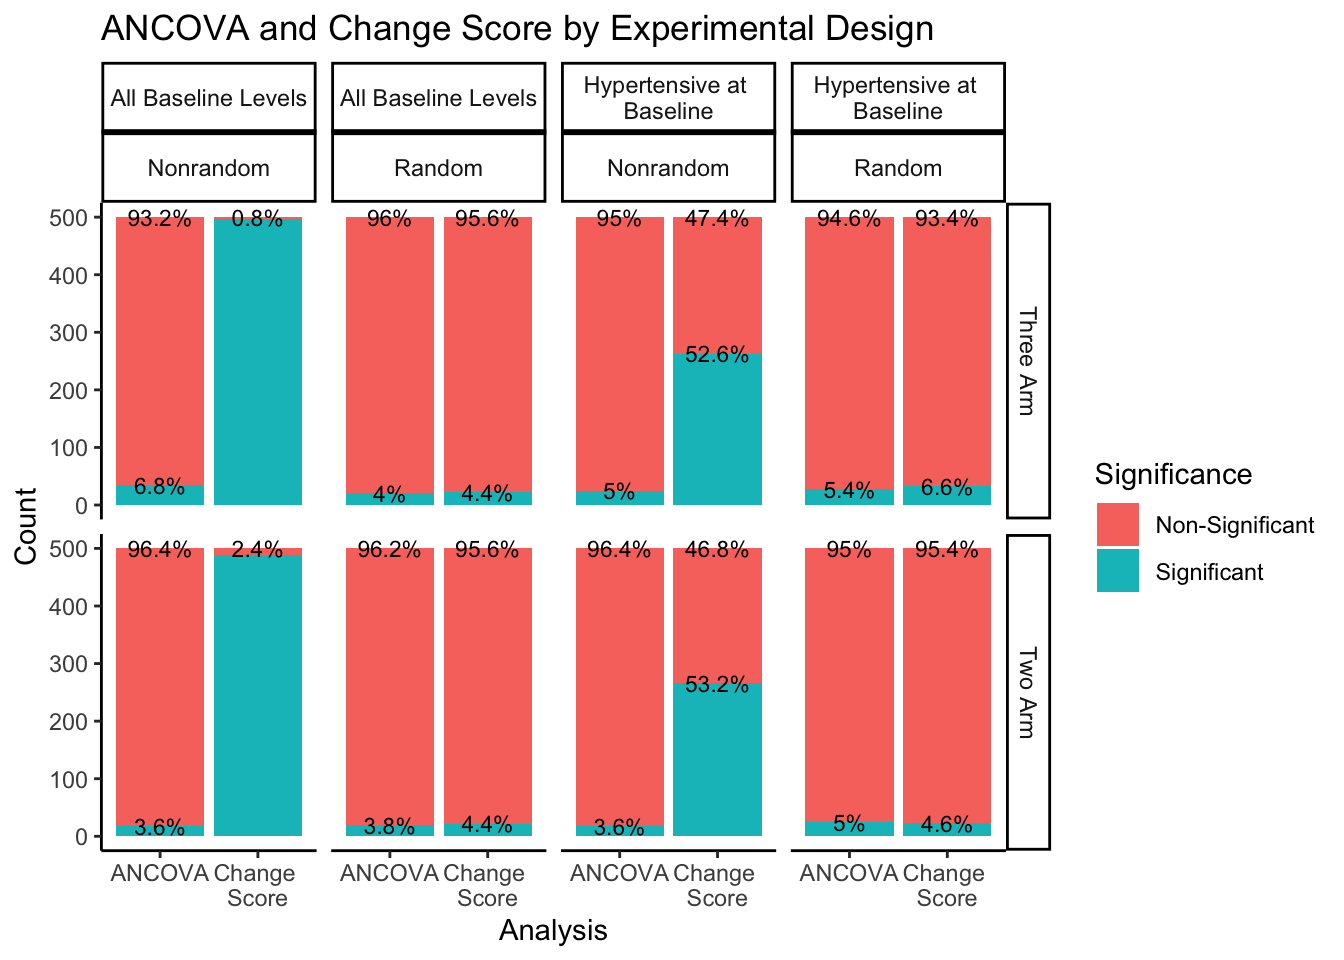 Barplot with 8 quadrants showing proportions of signifcance across All Baseline Levels or Hypertensive at Baseline levels, Nonrandom or Random Assignment, and ANCOVA or Change Score analysis. ANCOVA has around 5% significance for all conditions. When using Nonrandom assignment, Hypertensive at Baseline samples around 53% of iterations when using Change score analysis, and All Baseline levels samples had almost 100% significant findings when using Change Score analysis.